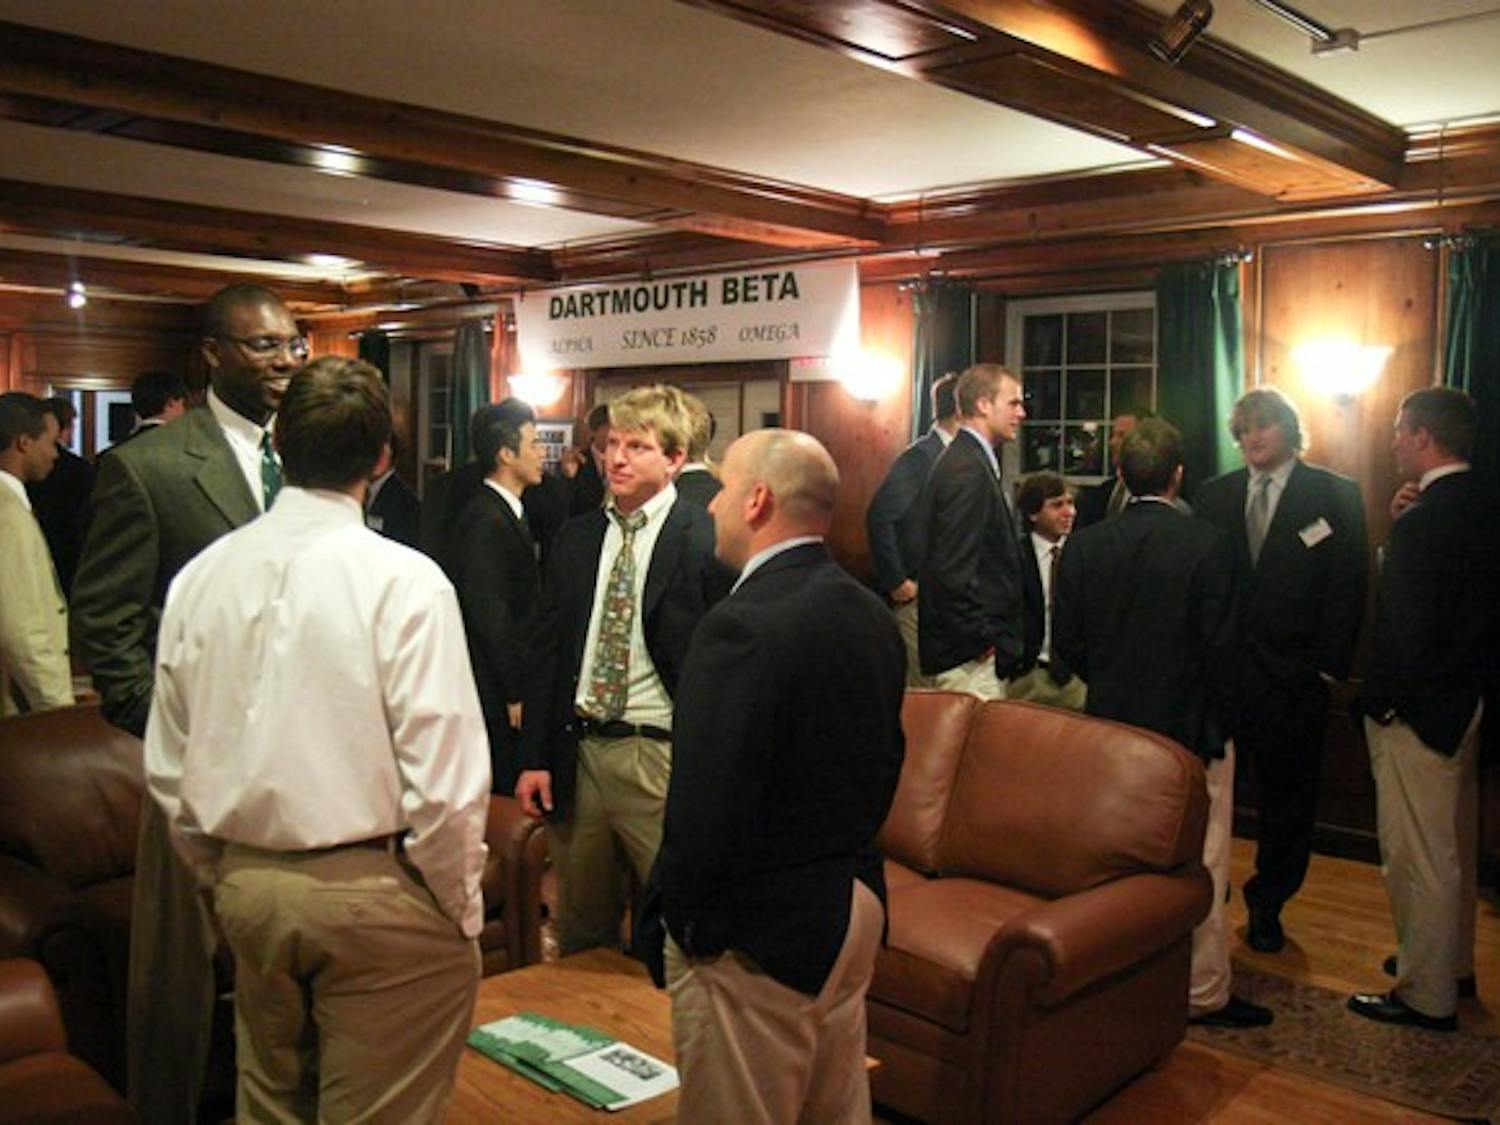 Beta Theta Pi fraternity recruited male sophomores, juniors and seniors in its first year back at the College in a decade.